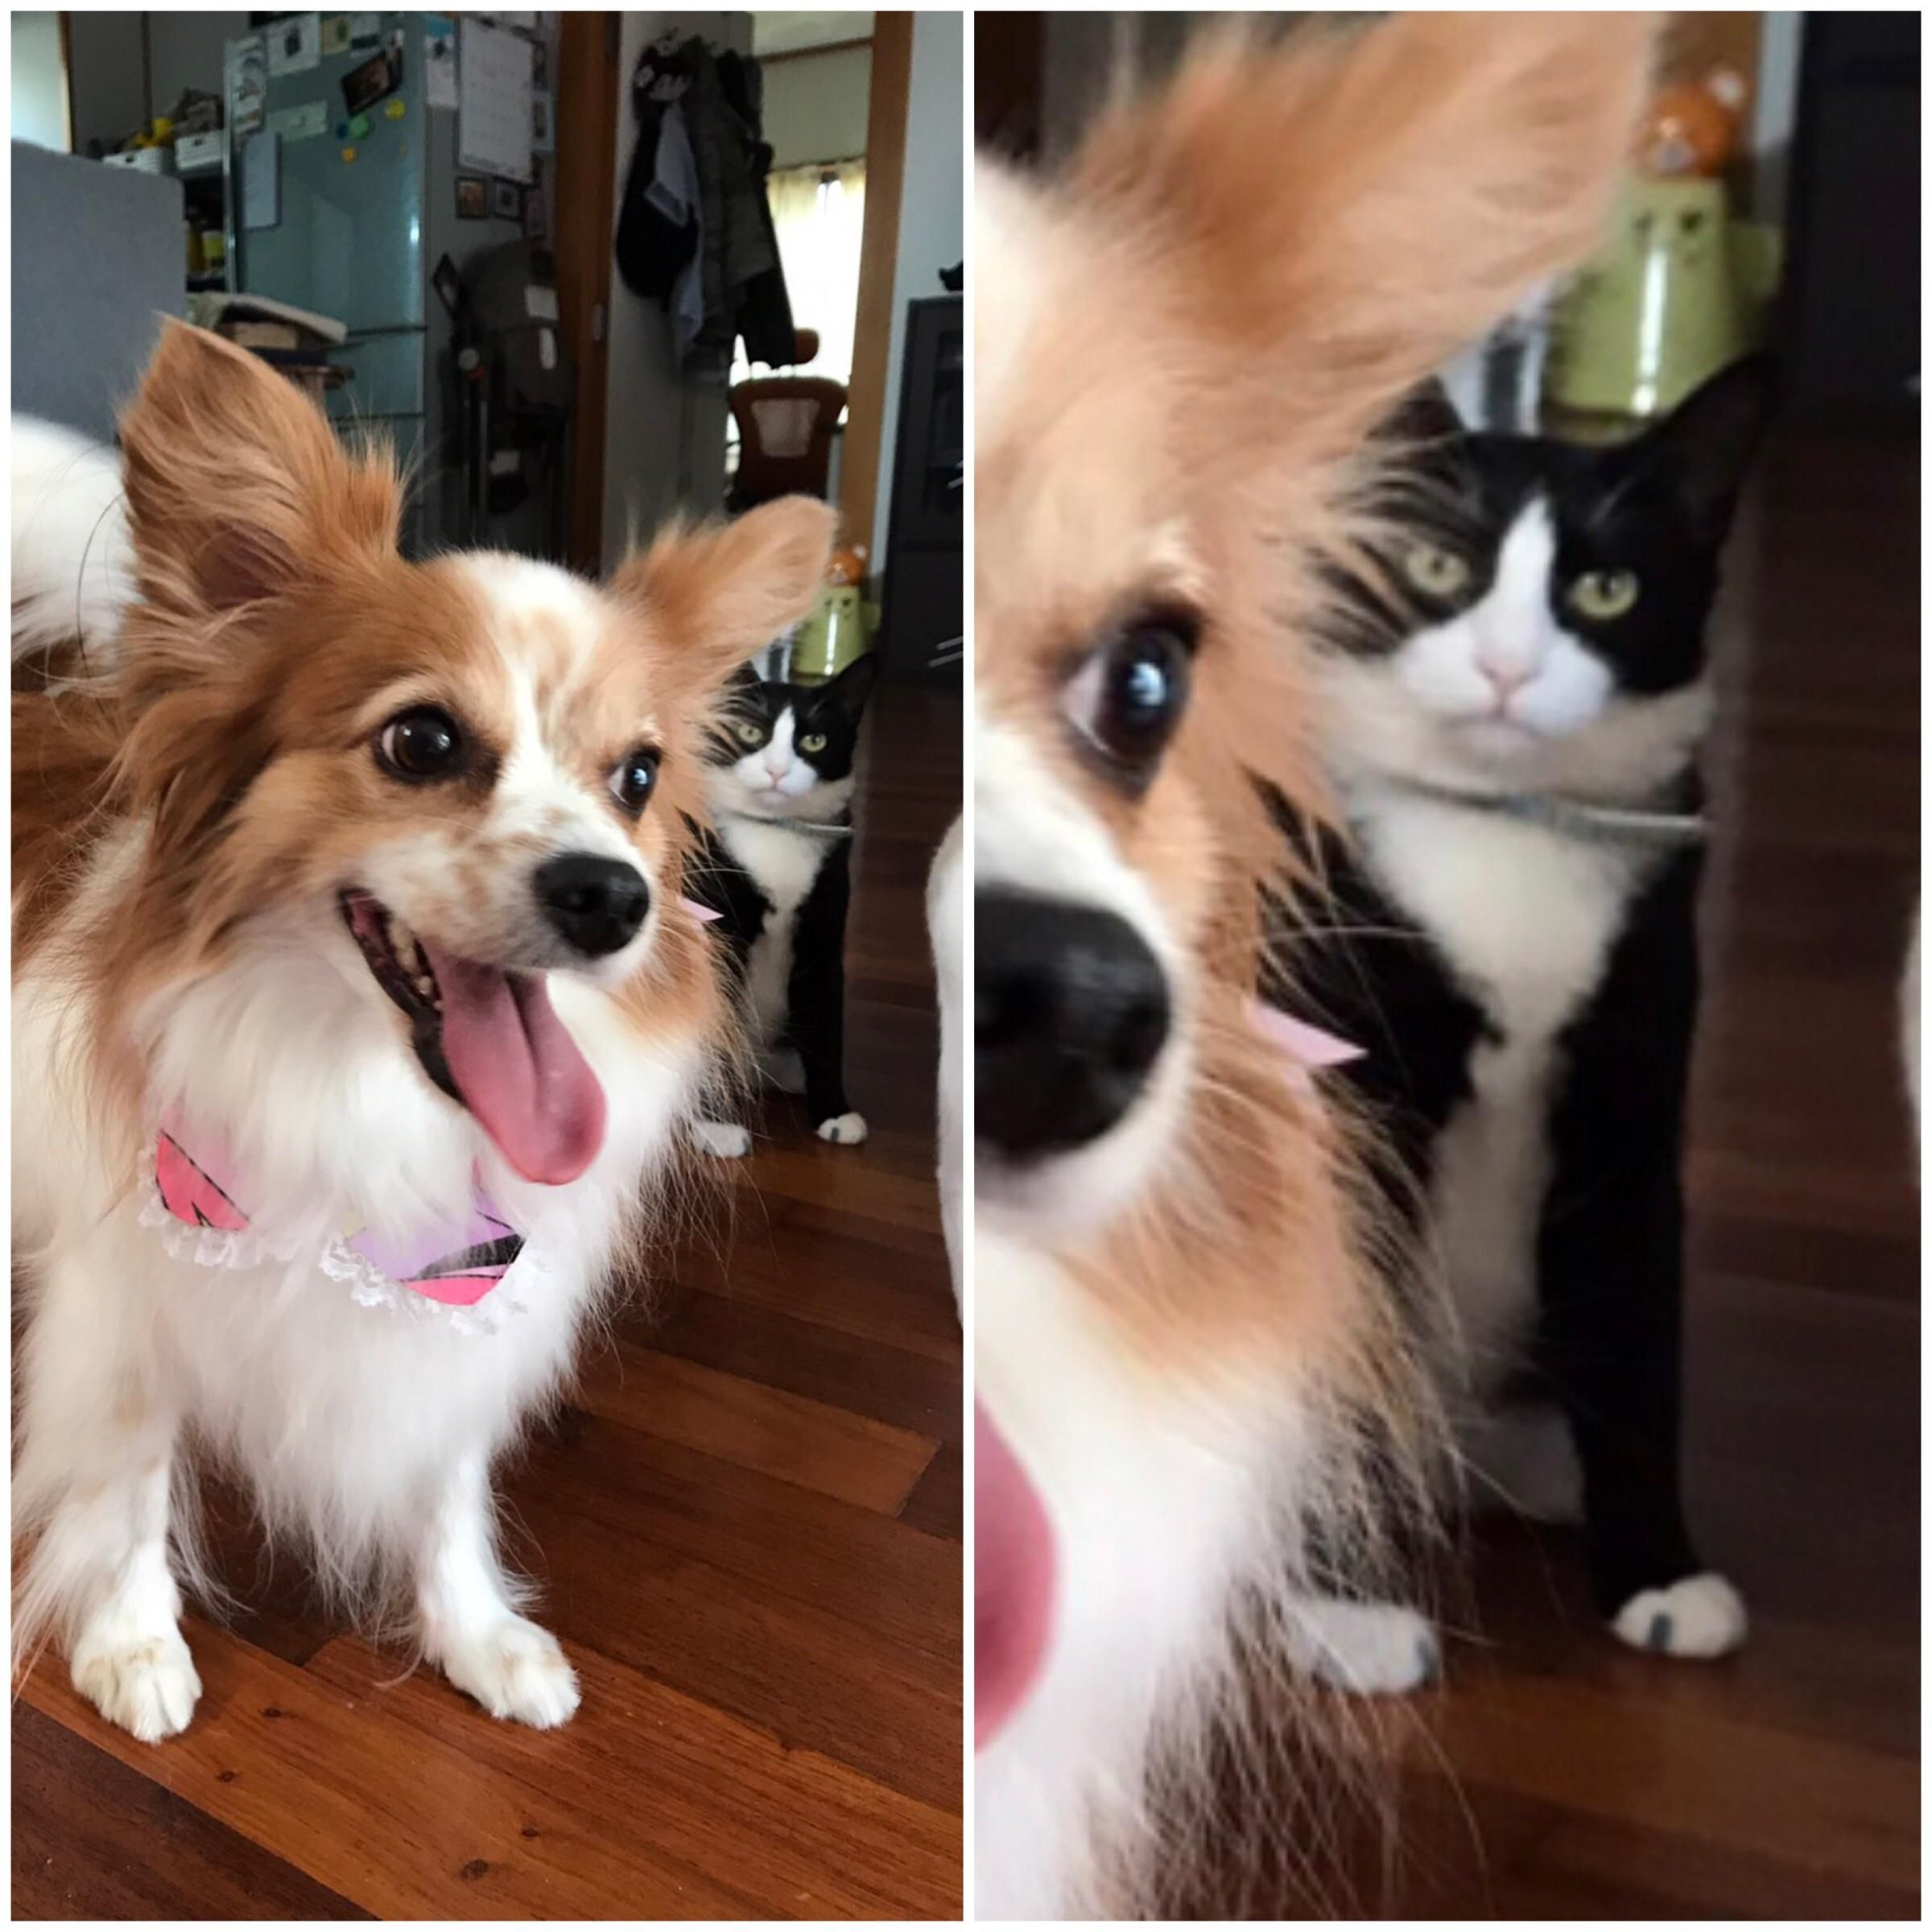 I picked my dog up from the groomers and my cat isn't too pleased I brought her back